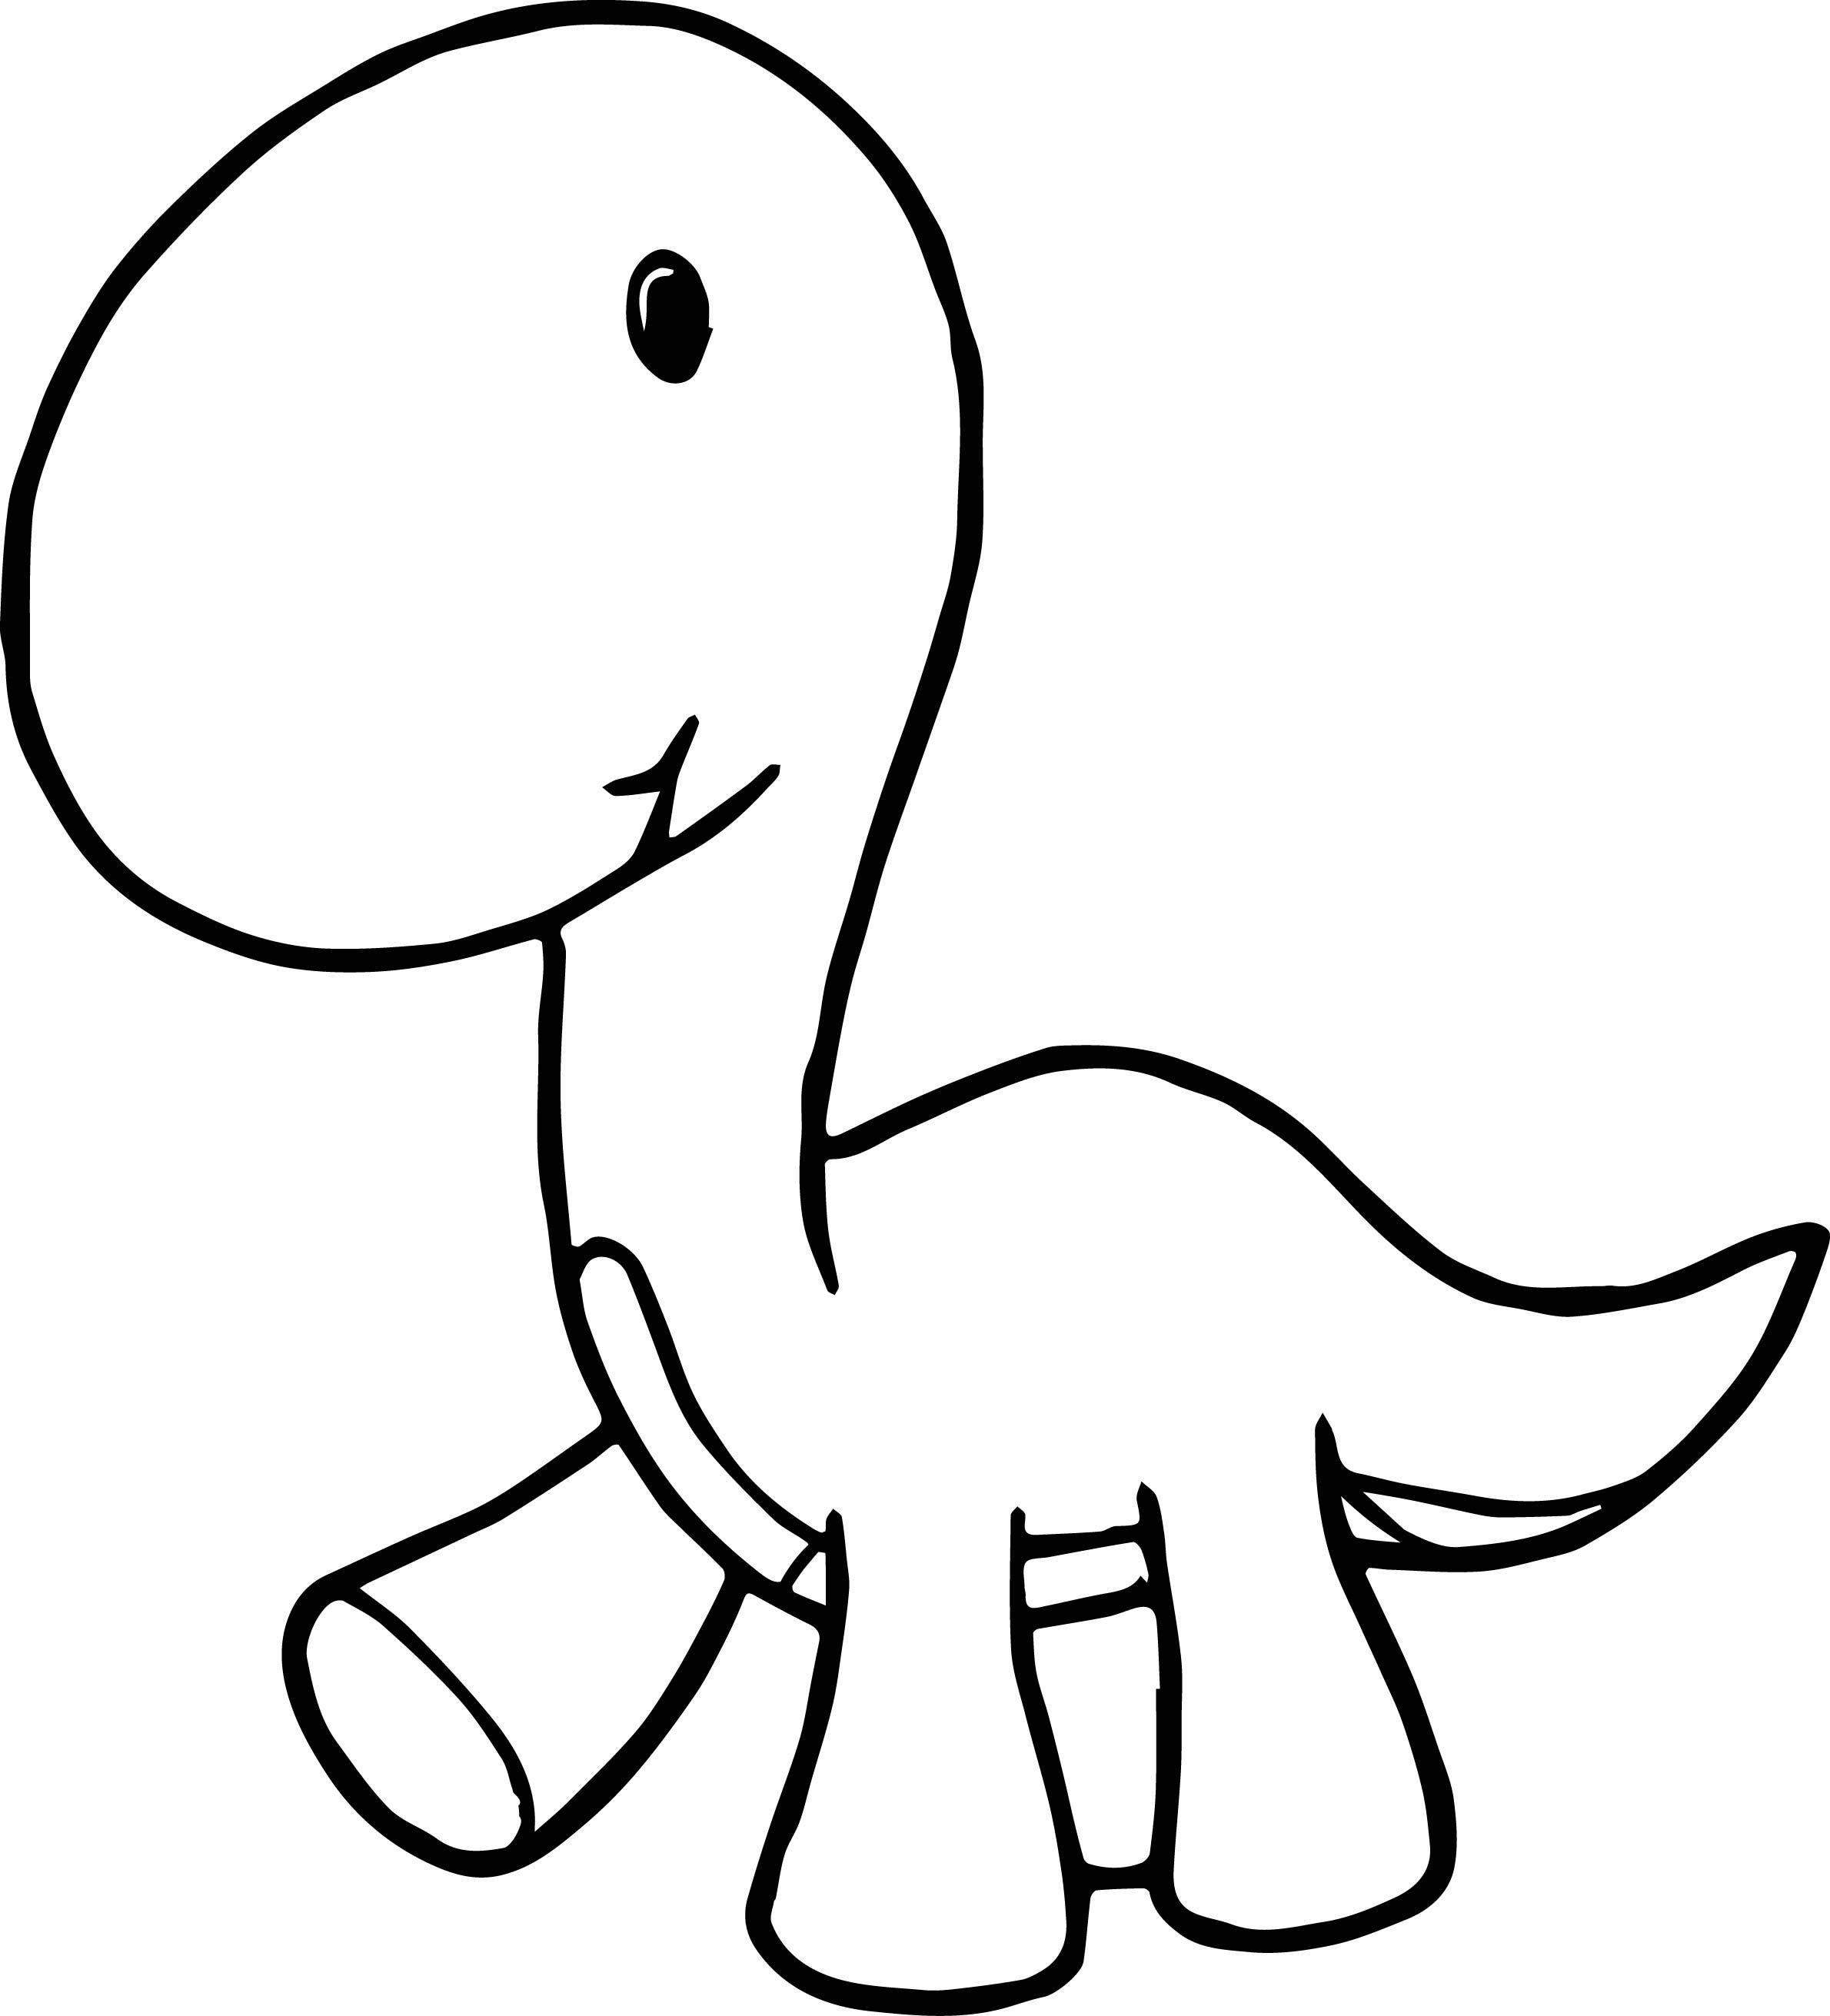 32-easy-cute-dinosaur-coloring-pages-background-colorist